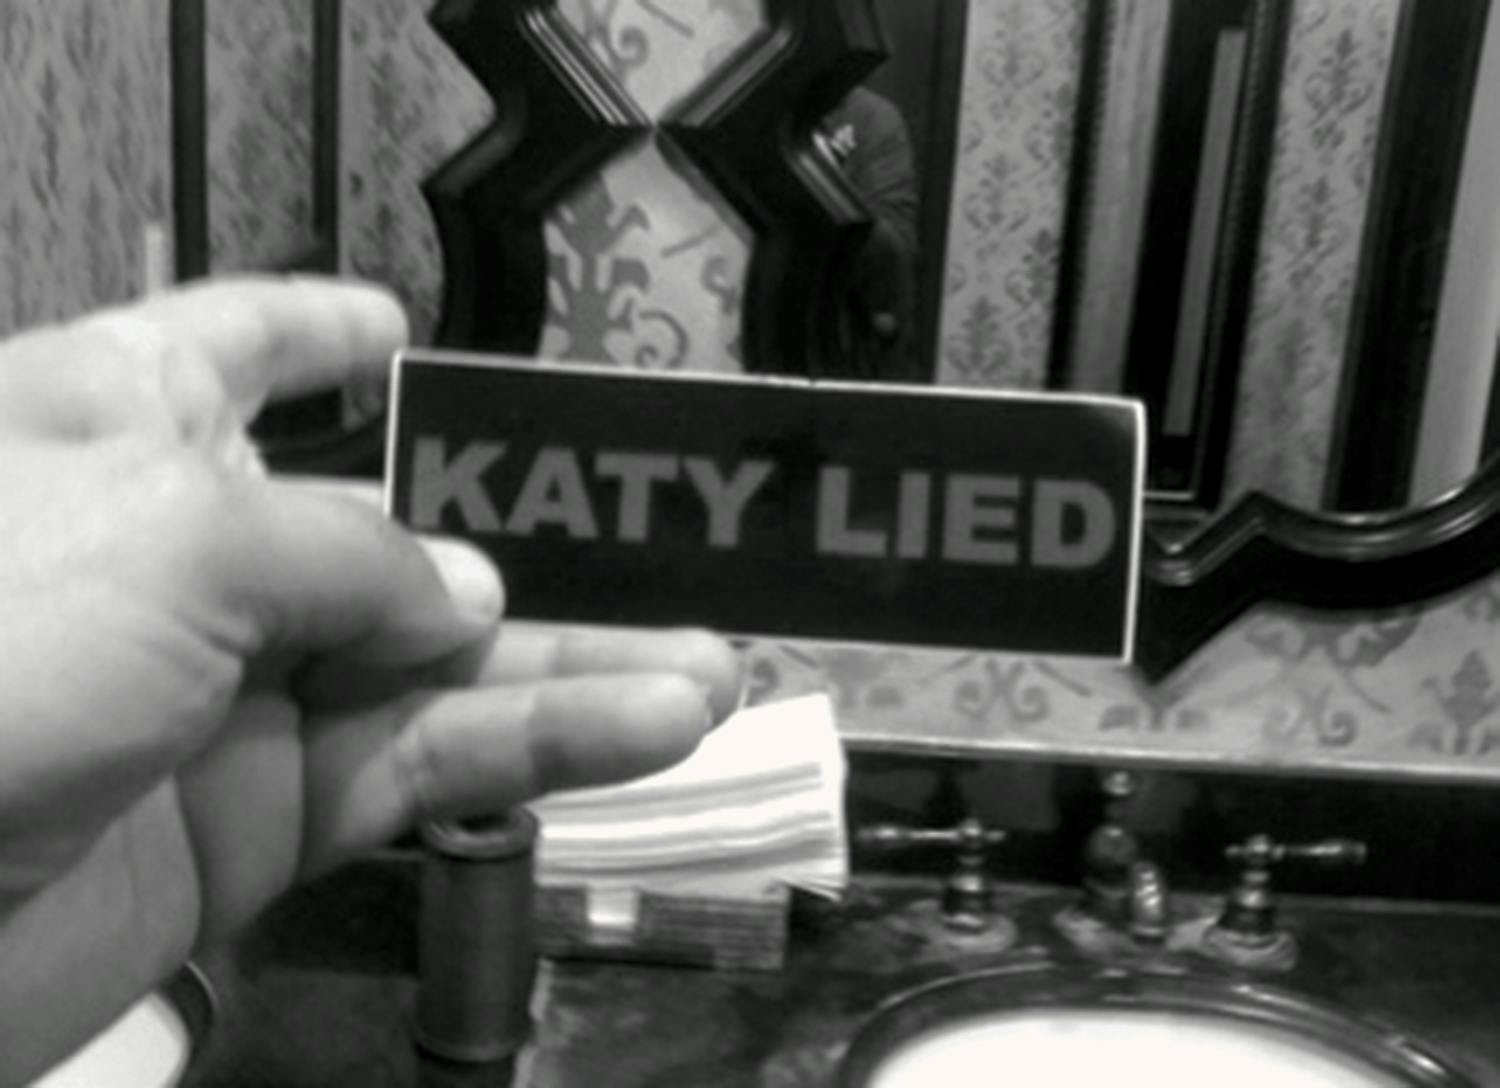 Sticker reading, "Katy Lied," photographed in a public bathroom. 